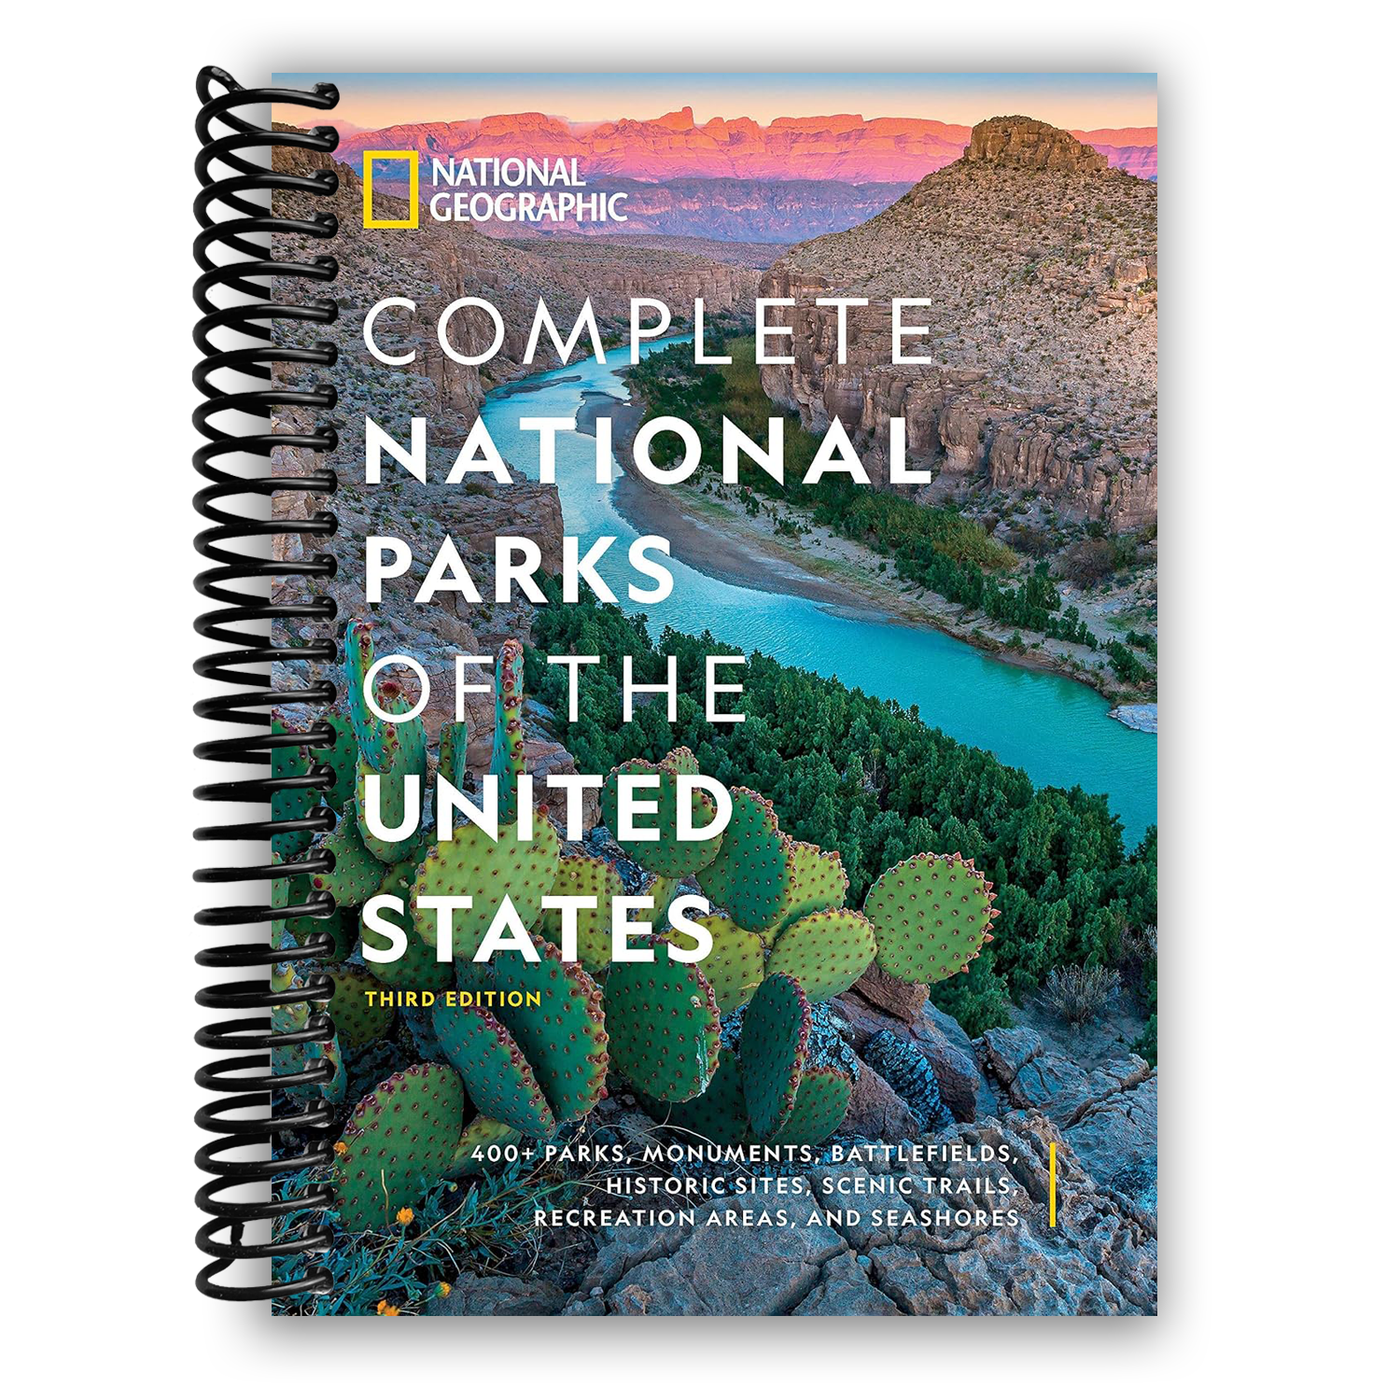 National Geographic Complete National Parks of the United States (Spiral Bound)